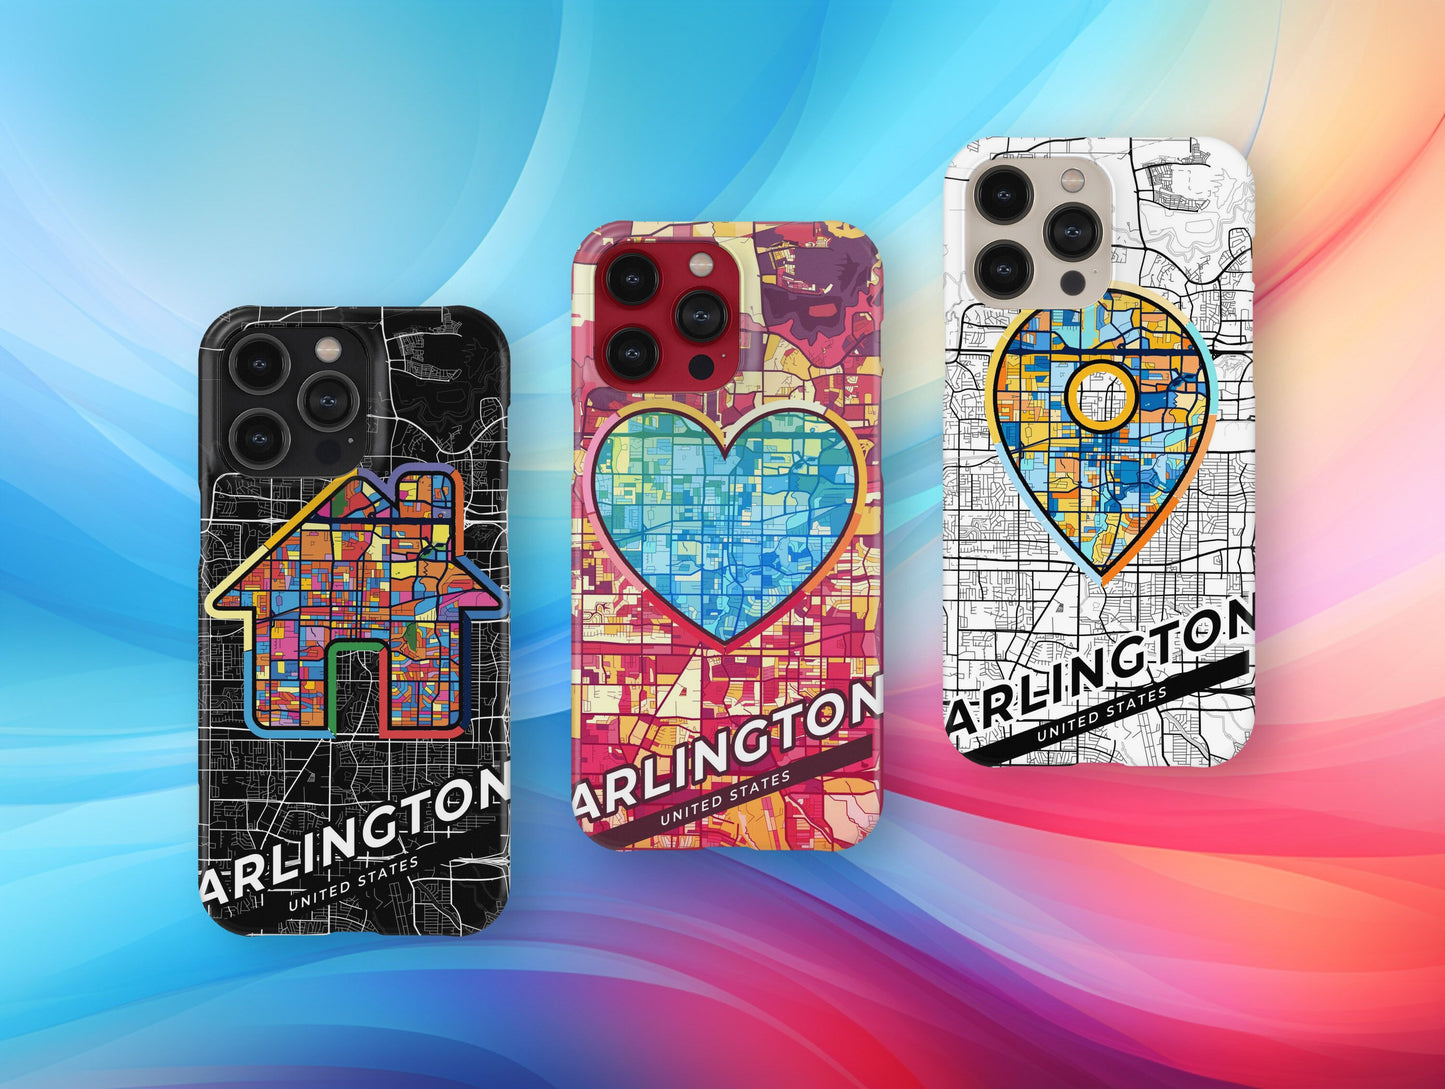 Arlington Texas slim phone case with colorful icon. Birthday, wedding or housewarming gift. Couple match cases.